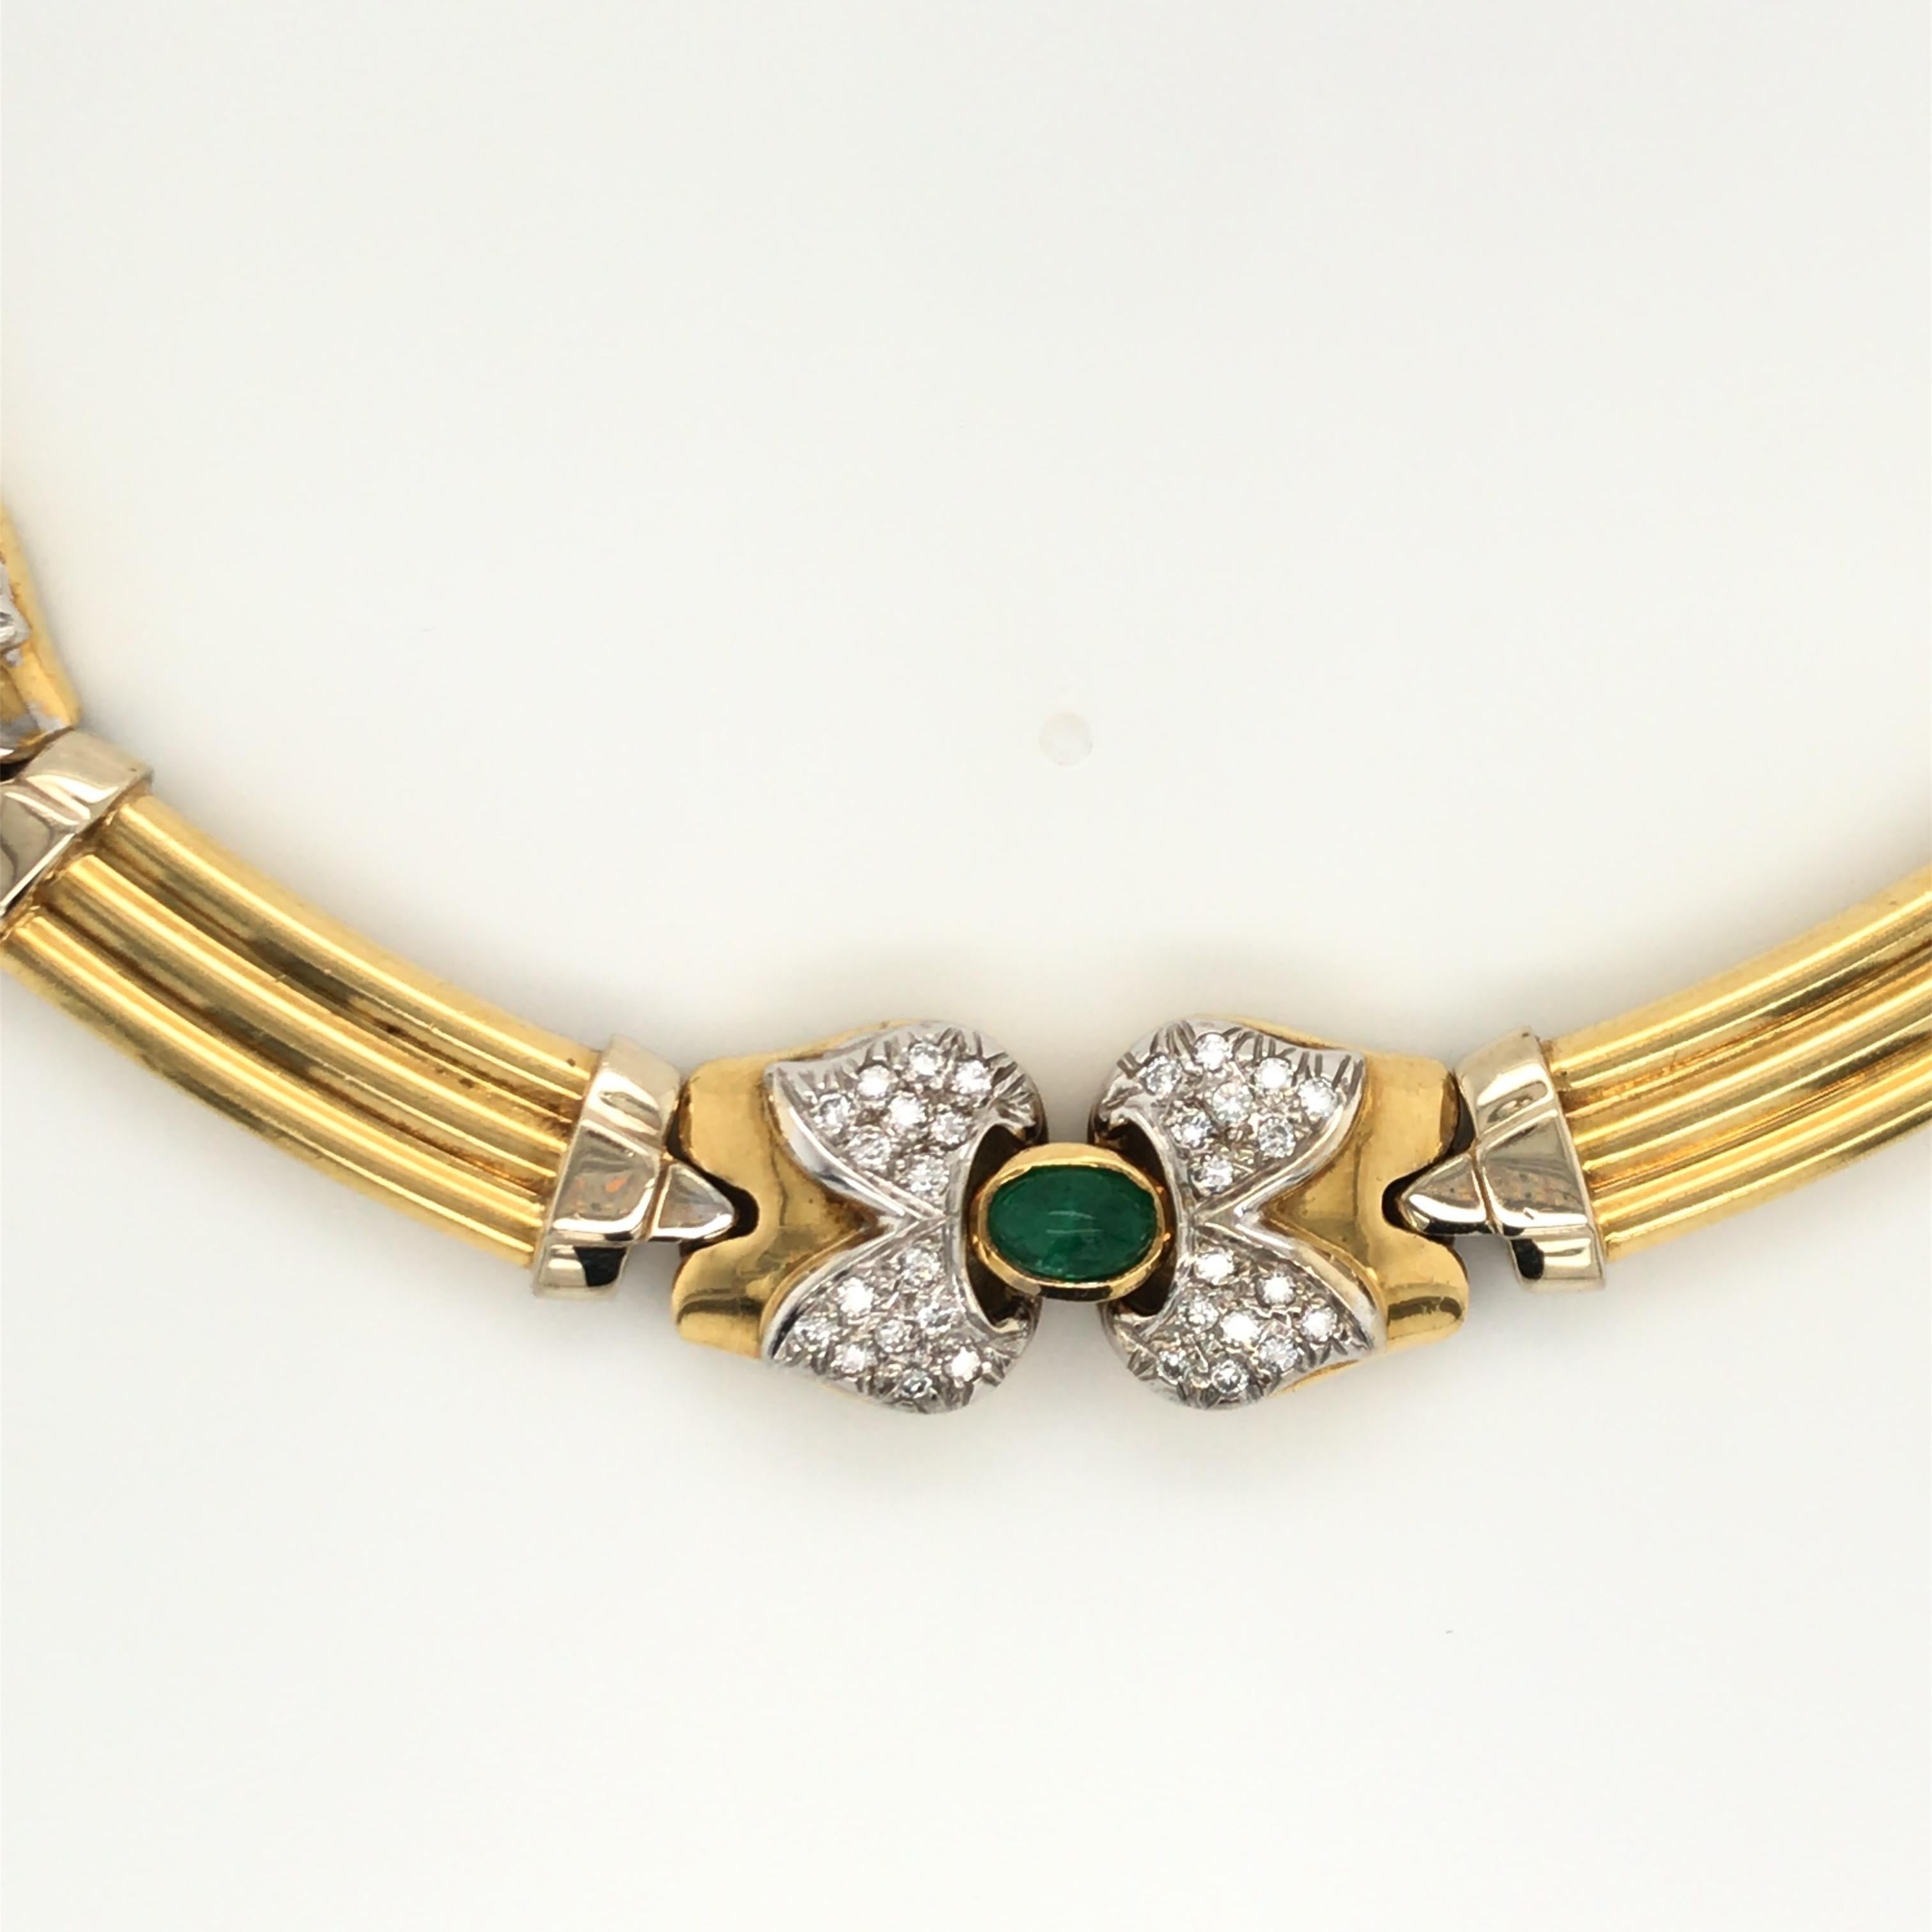 Contemporary Vintage Emerald Sapphire Ruby Yellow Gold Necklace with Diamonds 18 Karat Gold